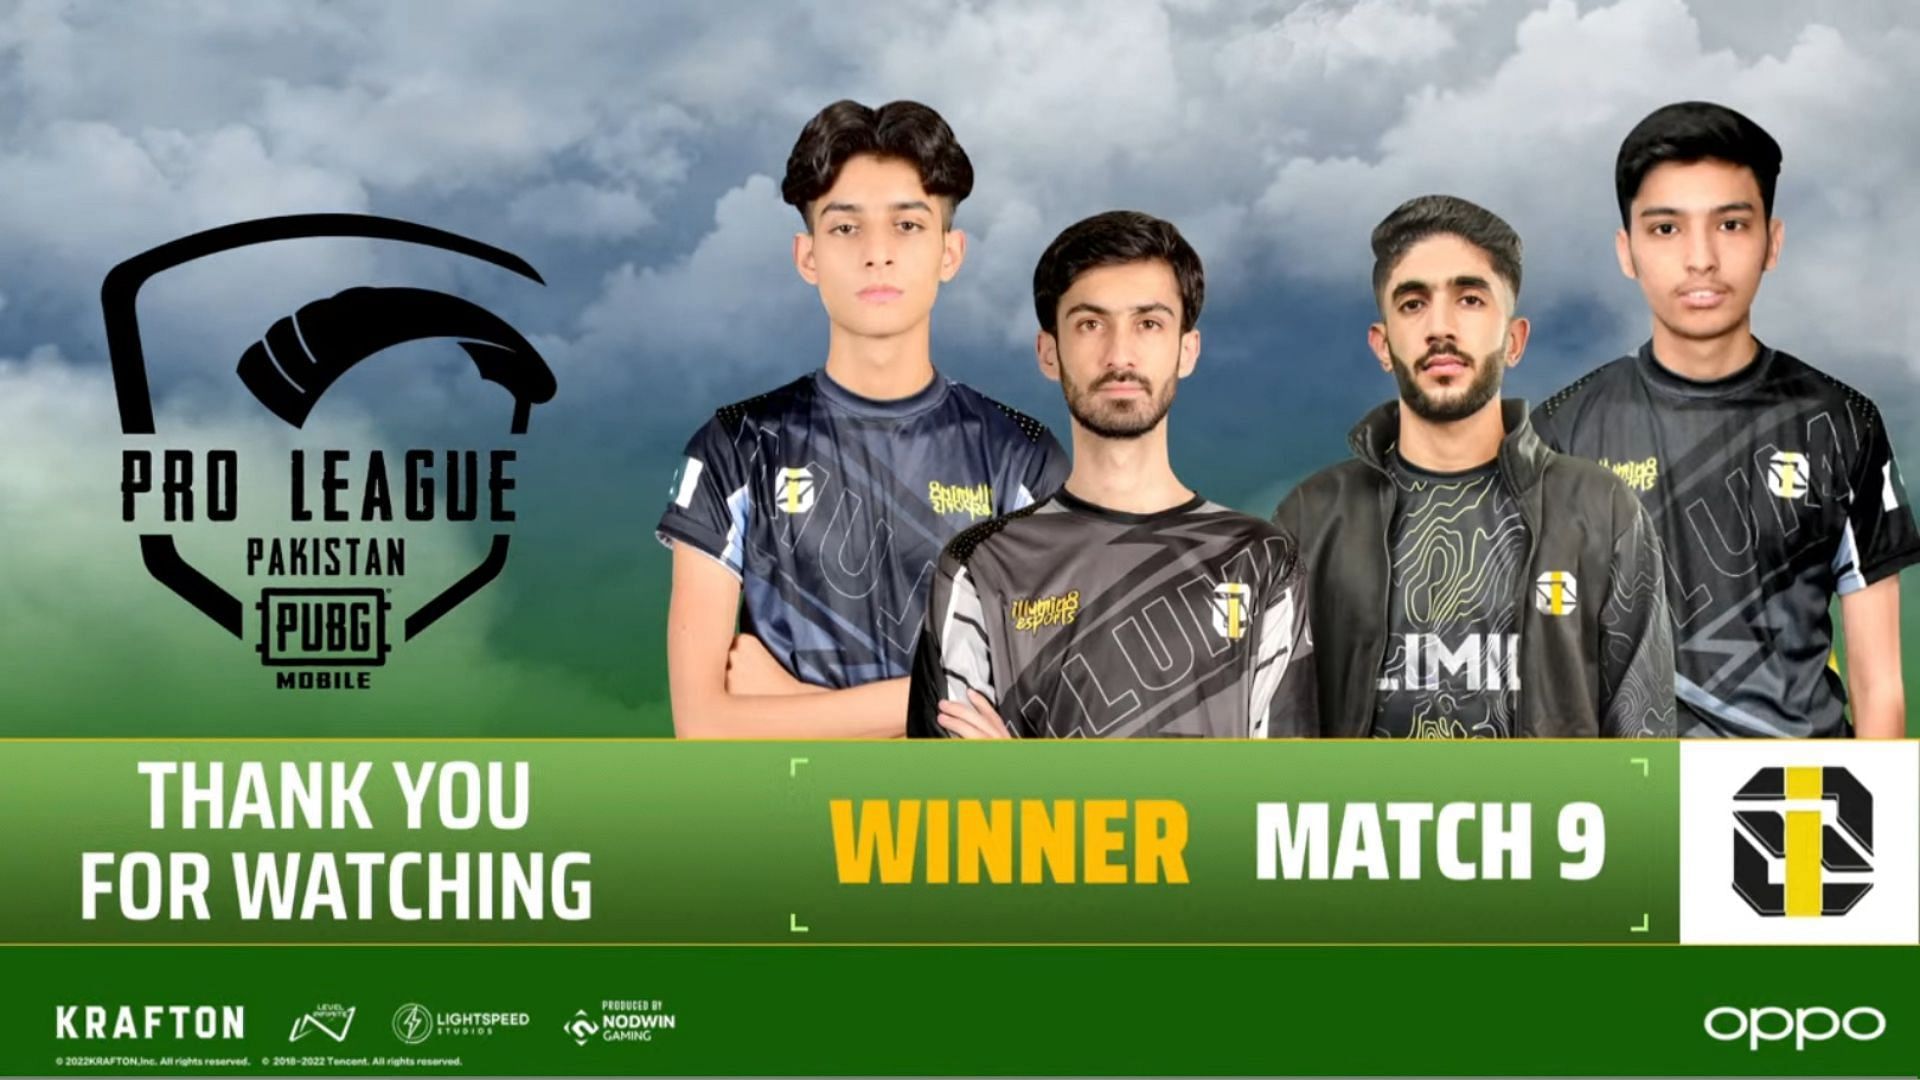 I8 Esports has won four chicken dinners so far in PMPL Pakistan Finals (Image via PUBG Mobile)